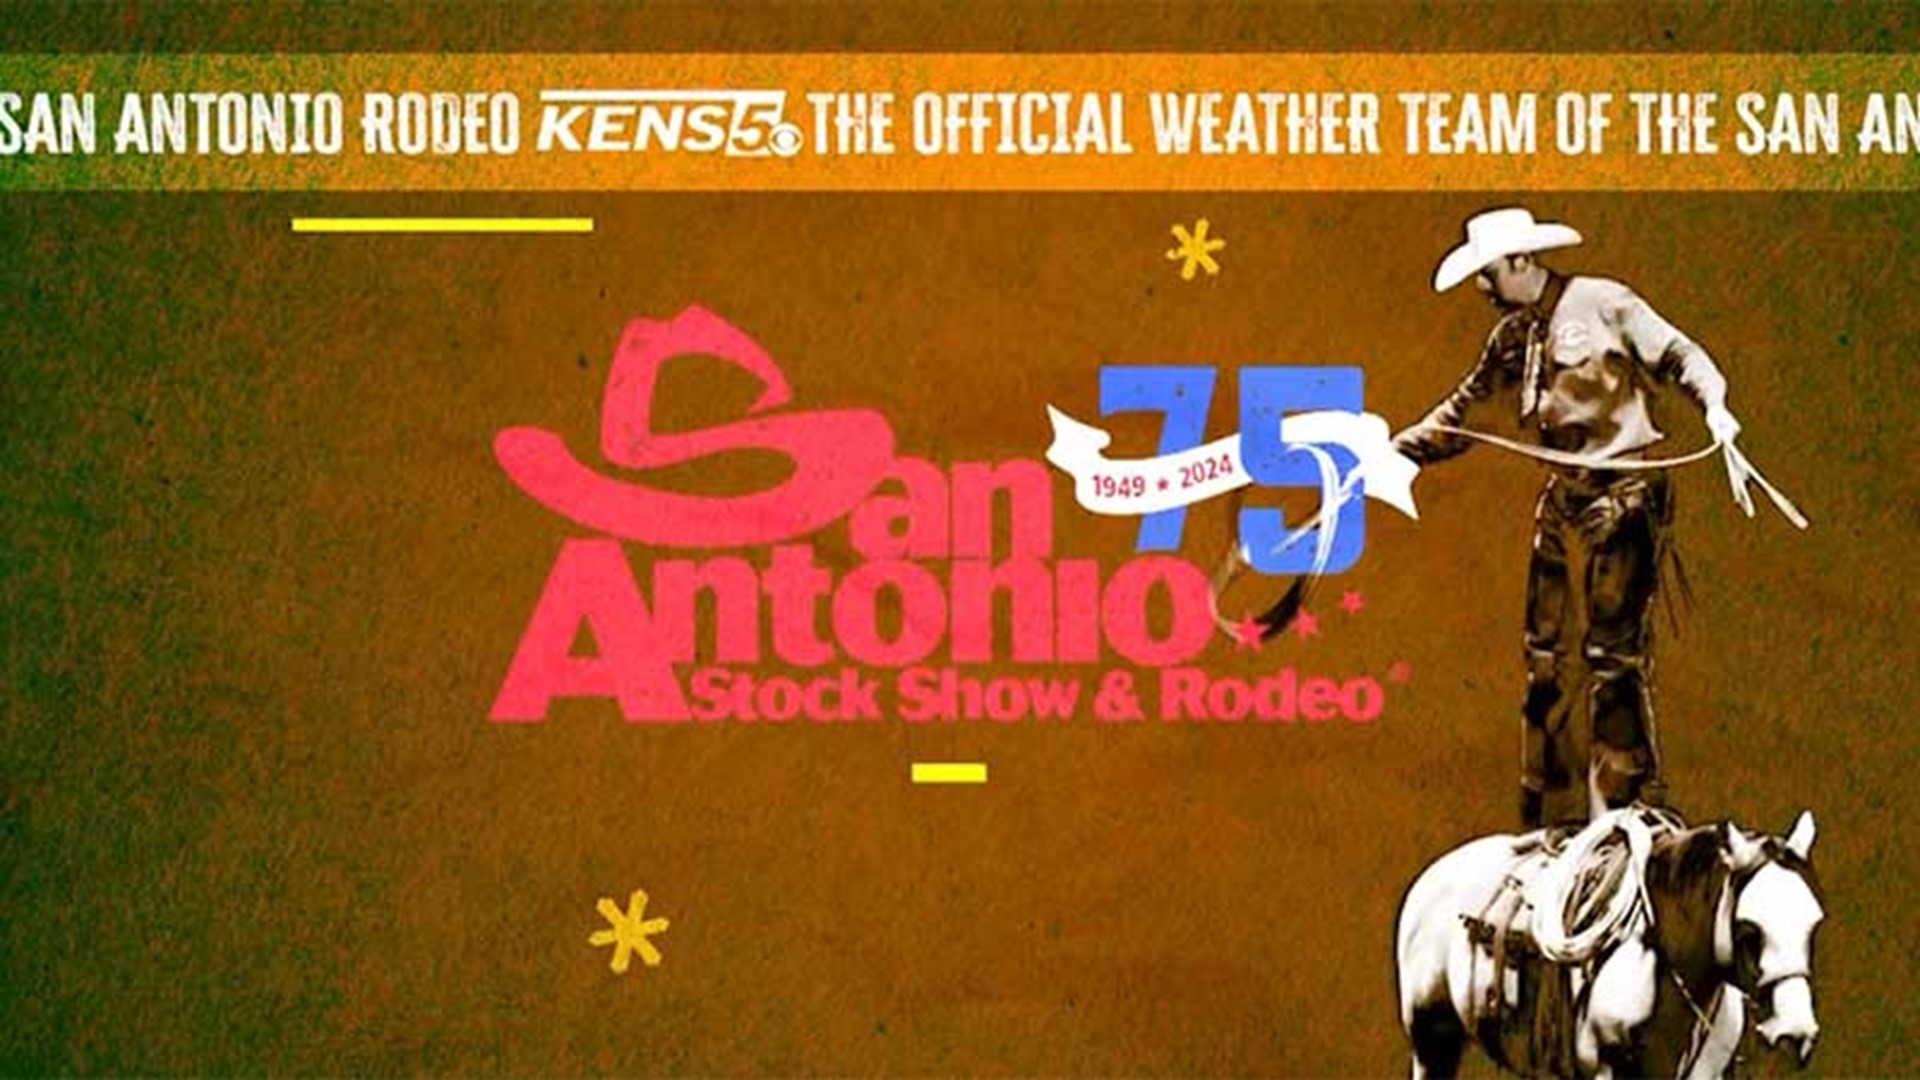 KENS 5 is the official weather station of the San Antonio Stock Show & Rodeo. Here's a look at all of music, events, food and fun!